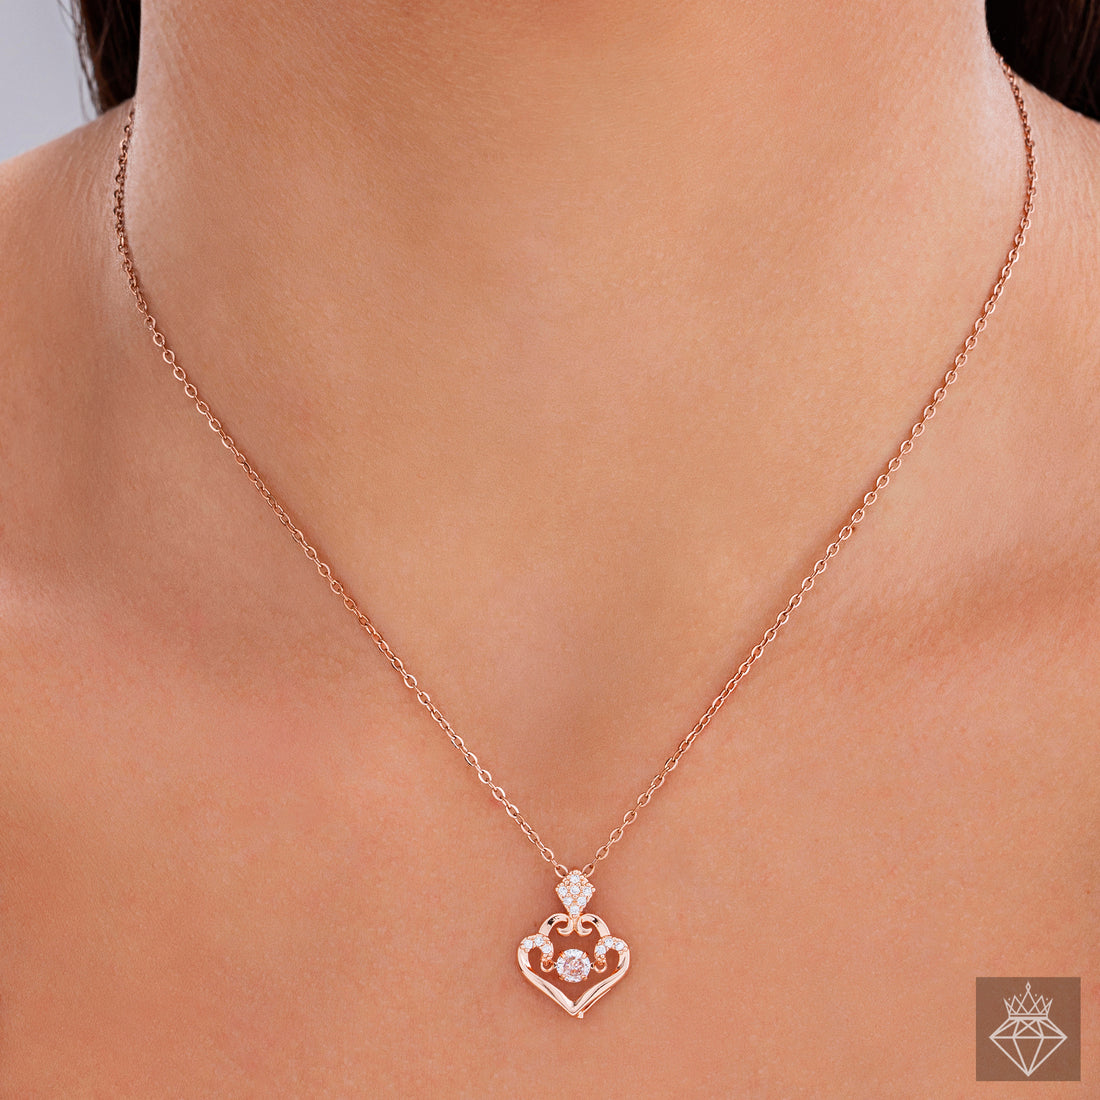 PRAO Exclusive Queen Heart Pendant Adorned With Dazzling Crystals